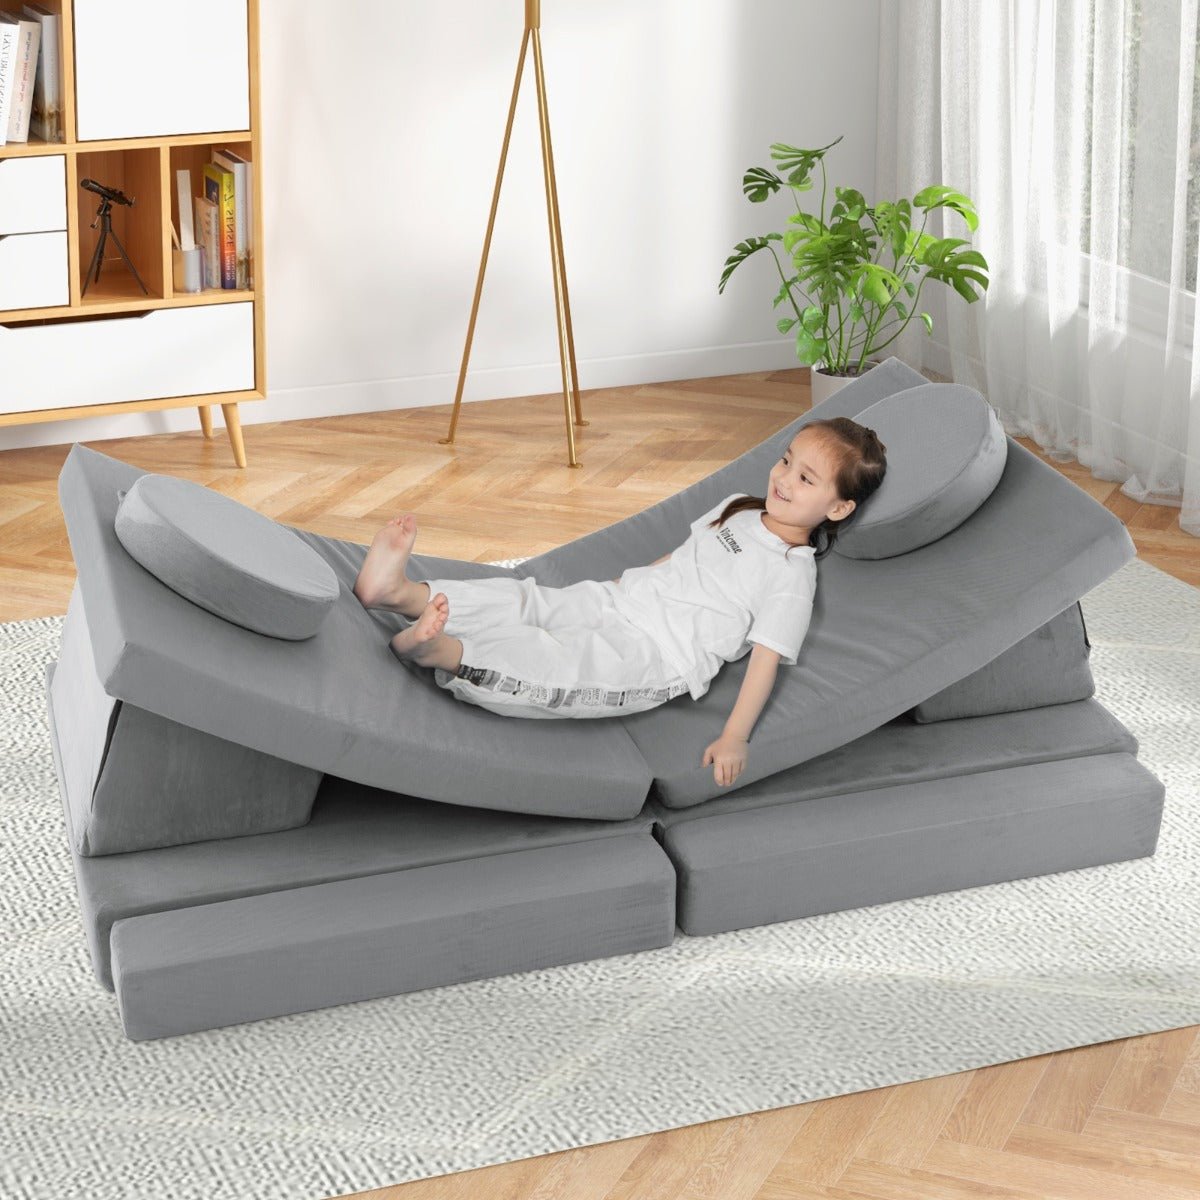 Upgrade Playtime with Our Grey Sofa - Shop Today!